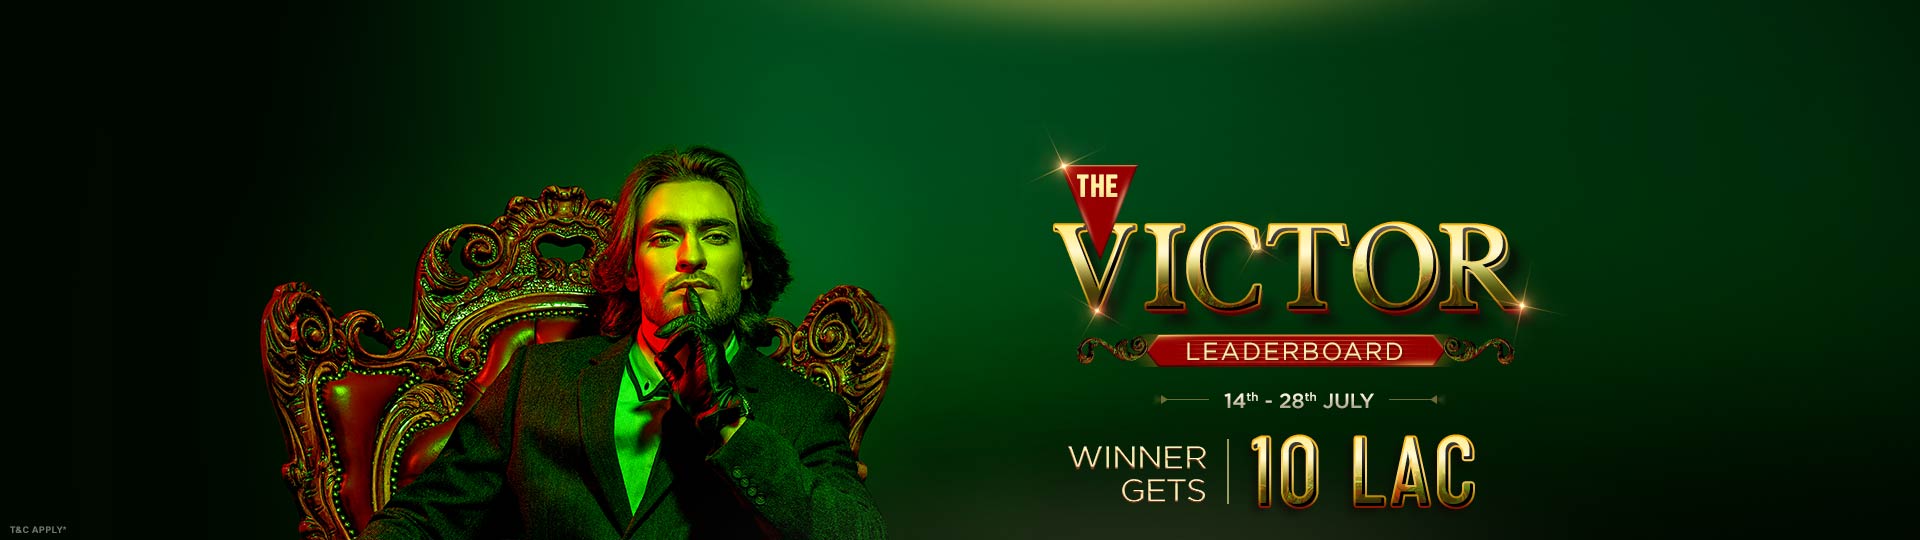 The Victor